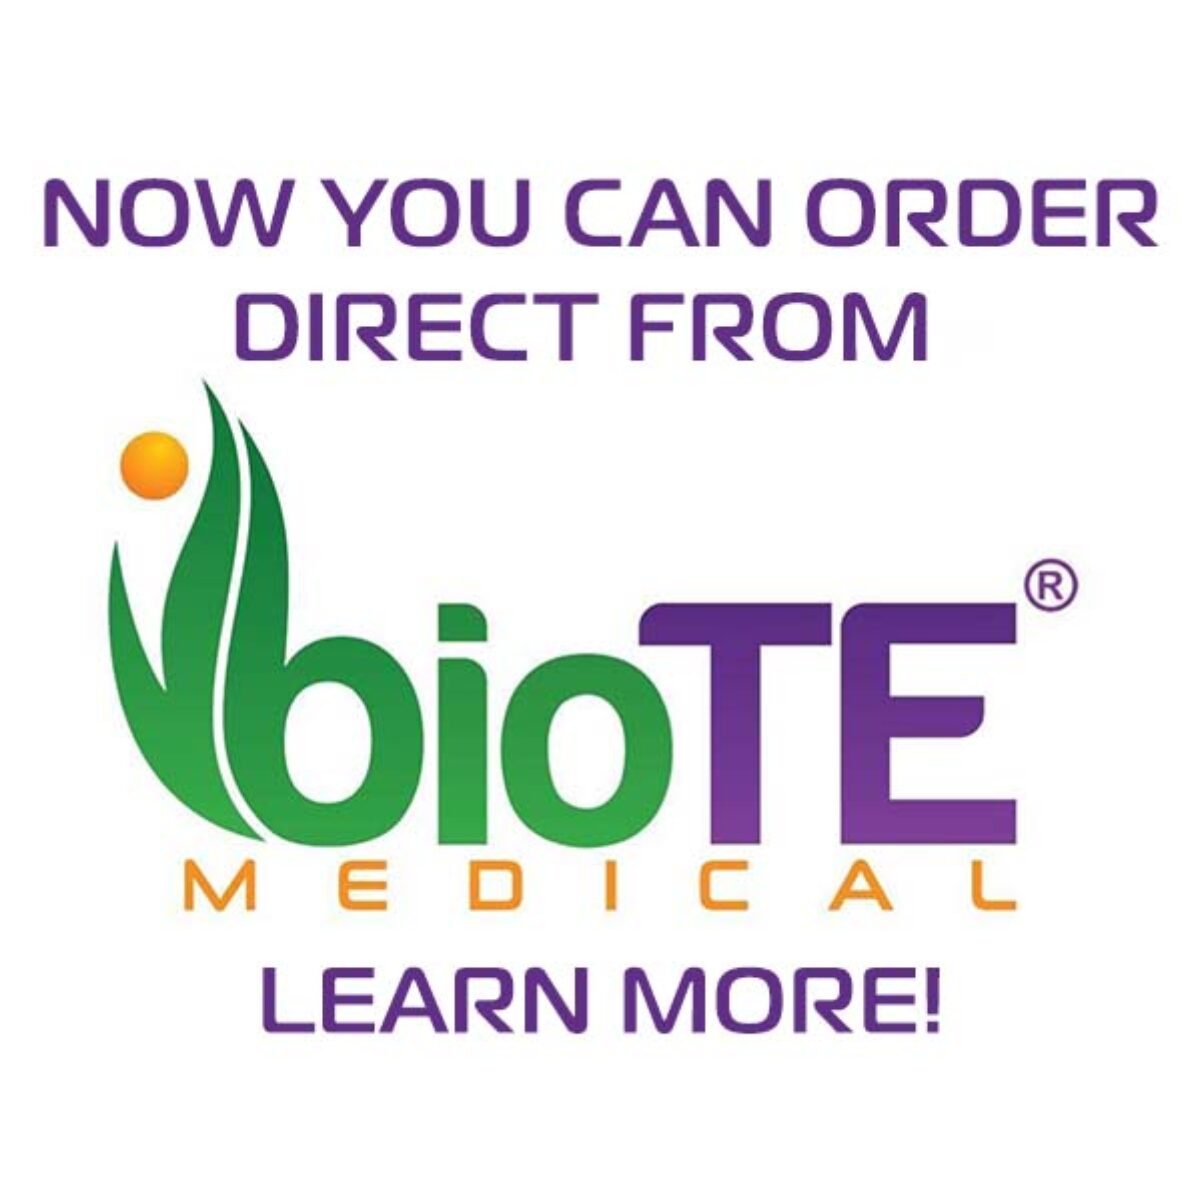 A picture of the biote medical logo.